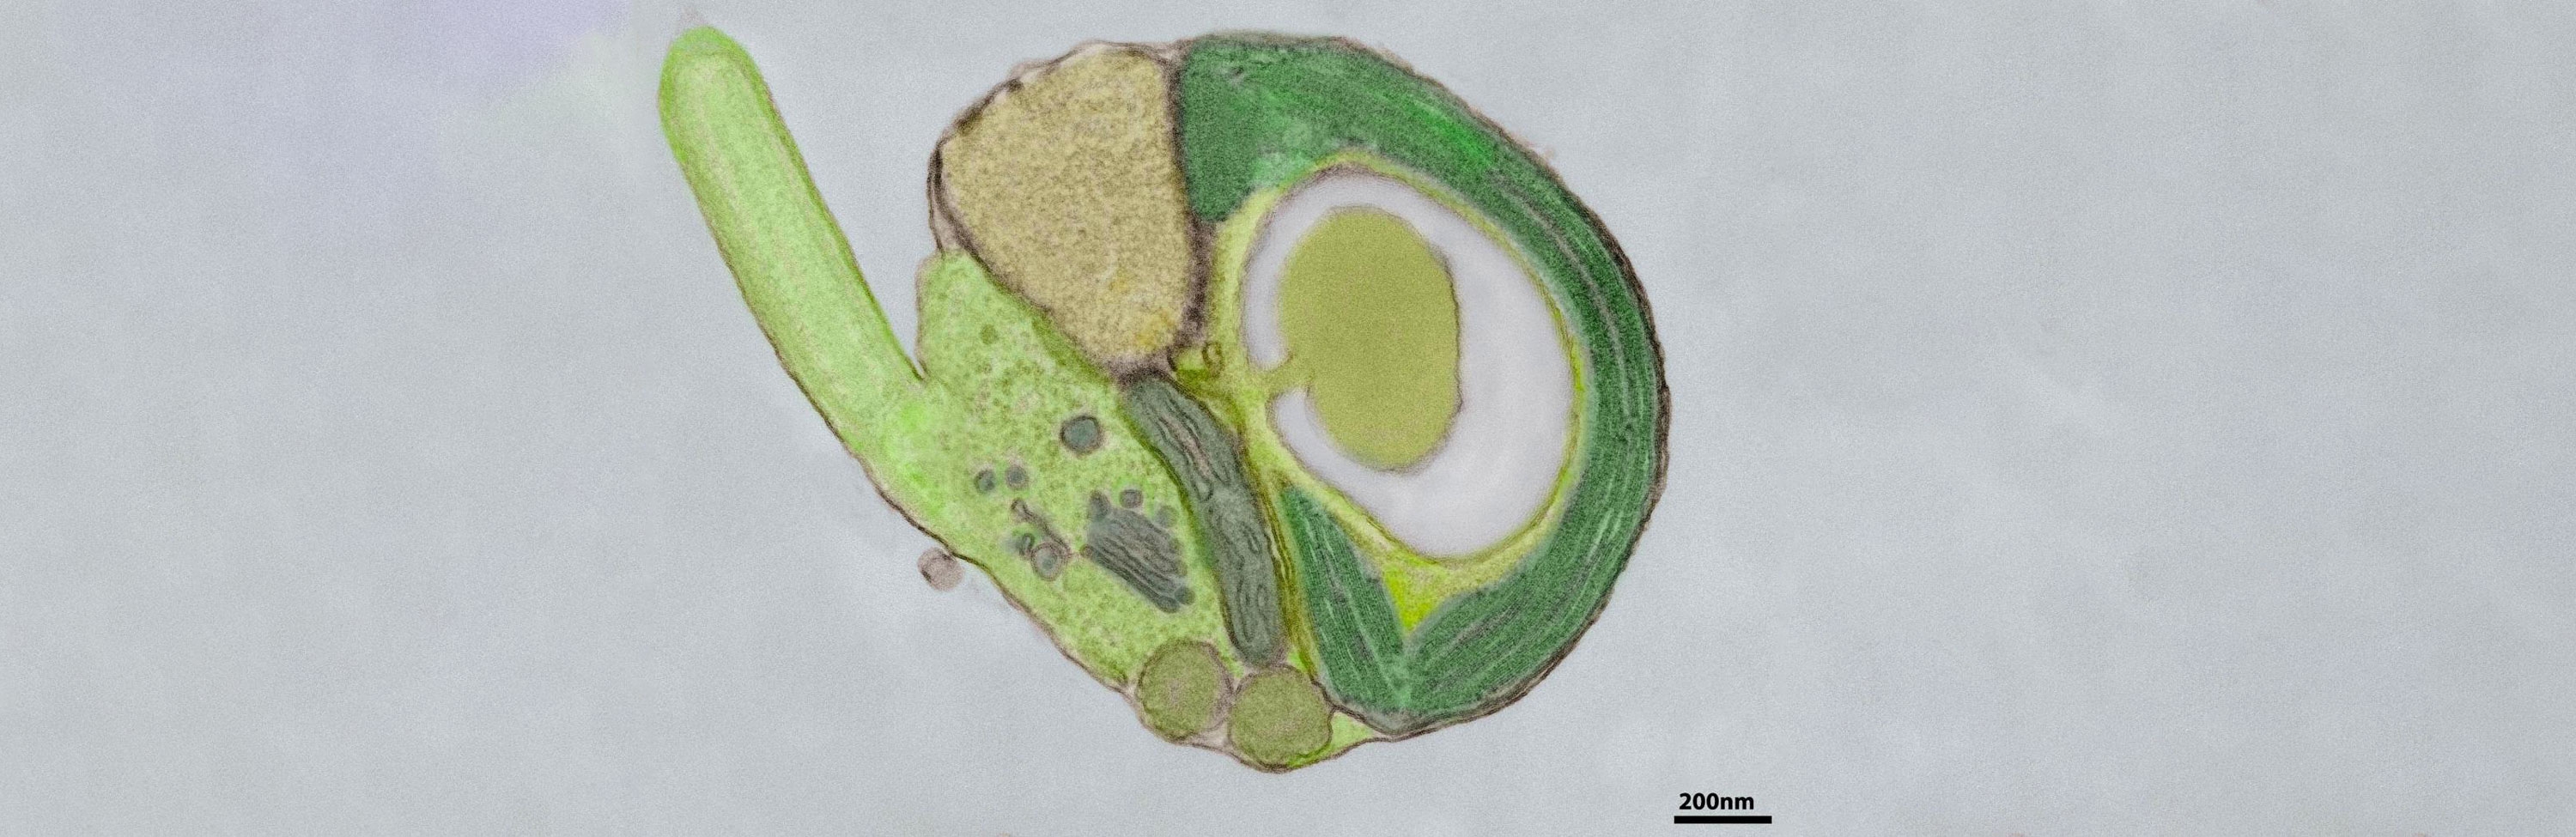 An alga of the genus Micromonas, for which the first transformation protocols are presented. Since Micromonas photosynthesizes with the chloroplast (shown here in green) and is very abundant in the ocean, it plays a role in the global carbon cycle